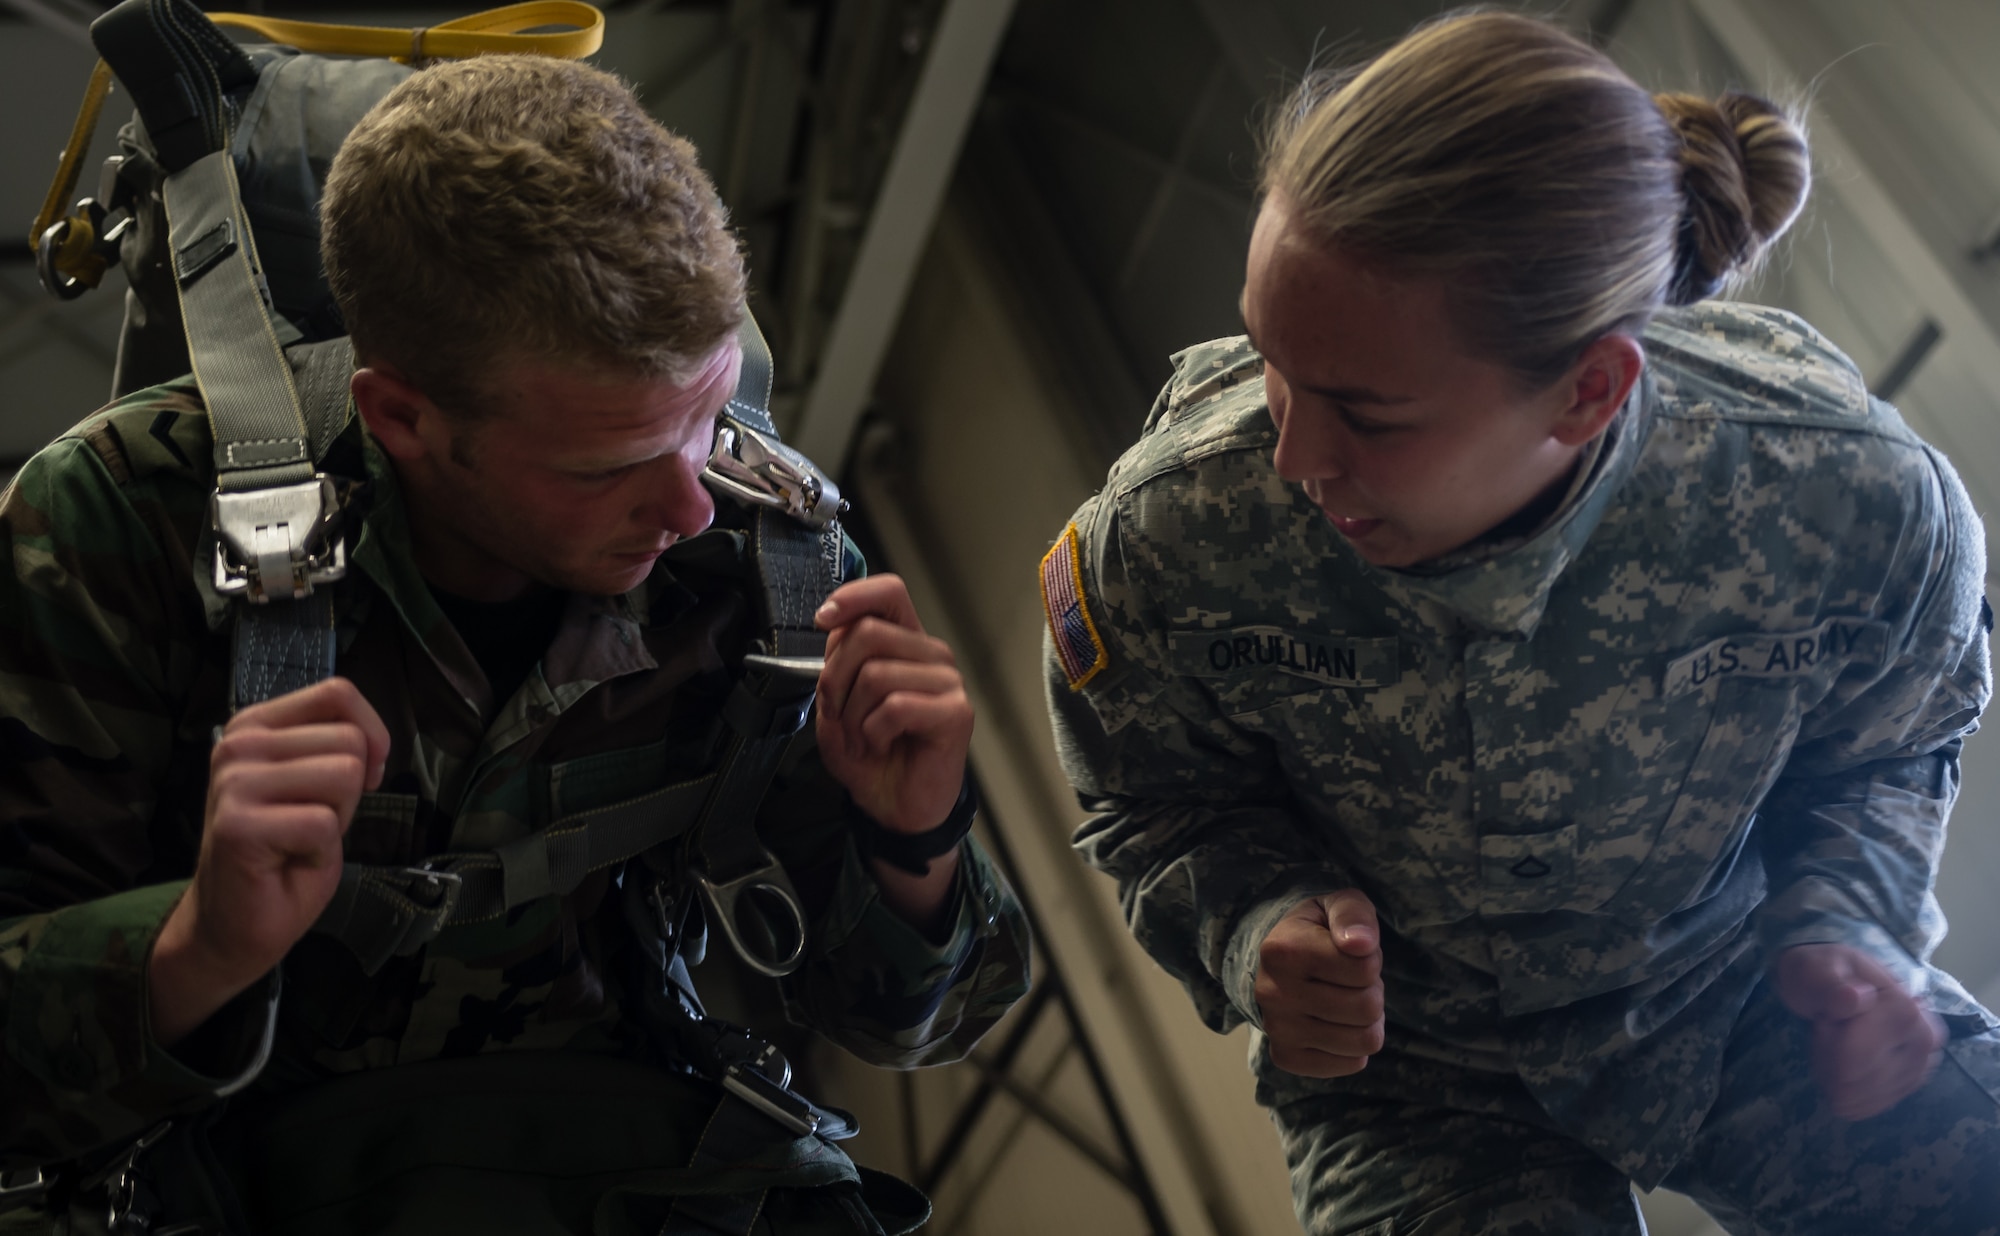 Army Pfc. Kelly Orullian, 5th Quartermaster Aerial Delivery parachute rigger, helps prepare (Korps Mariniers) Royal Netherlands Navy, 1st Class Marine Roy Mave, 11th Raiding Squadron before boarding a C-130J Super Hercules as part of International Jump Week on Ramstein Air Base, Germany, May 6, 2014. A total of 97 foreign and allied partners tested, built and strengthened partnerships during jump week alongside American Airmen and Soldiers. (U.S. Air Force photo/Airman 1st Class Jordan Castelan)